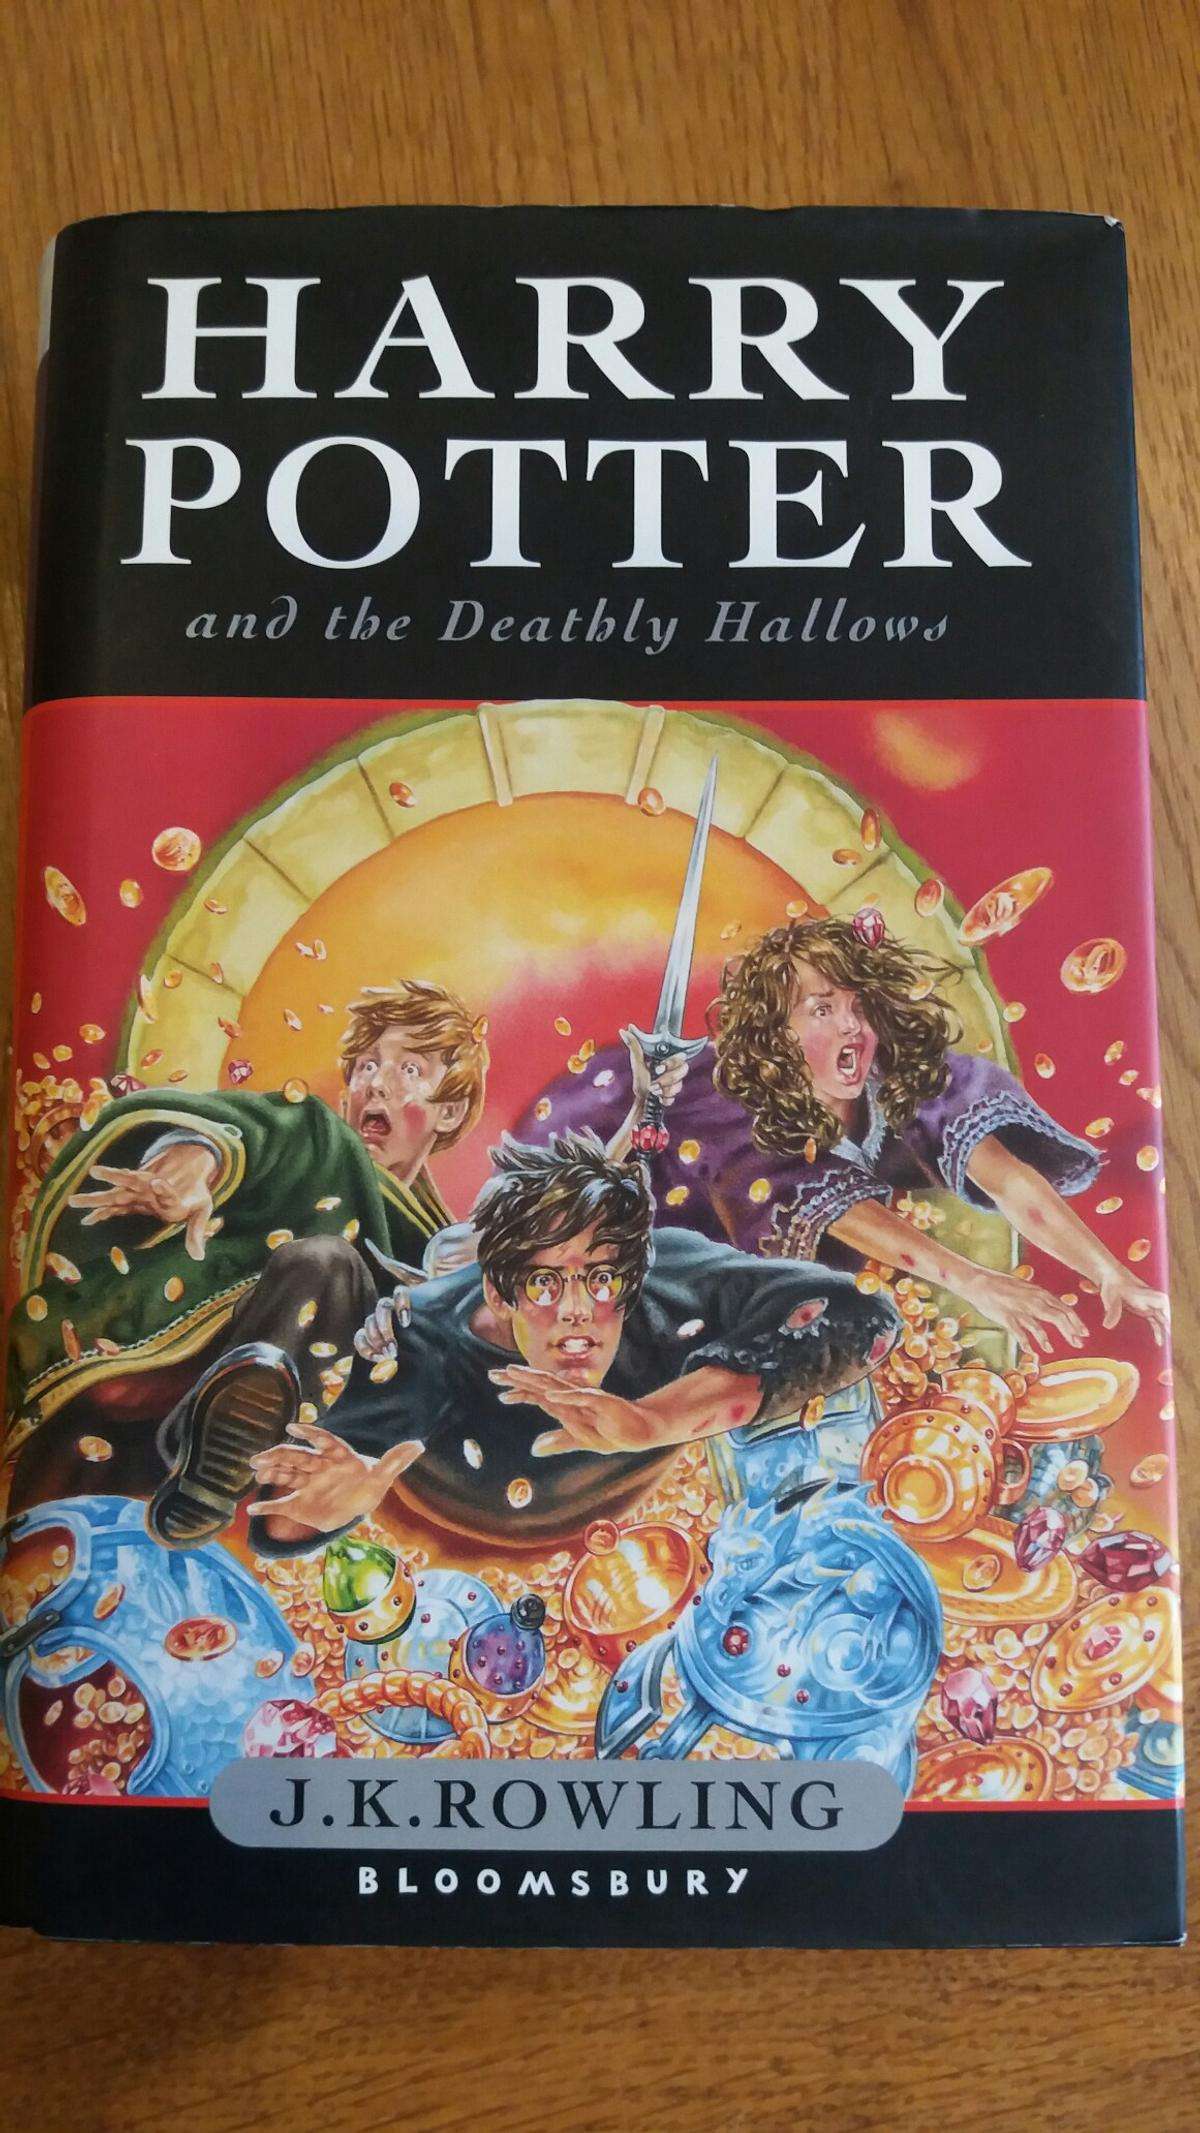 What was the first book of harry potter heavenlybells.org